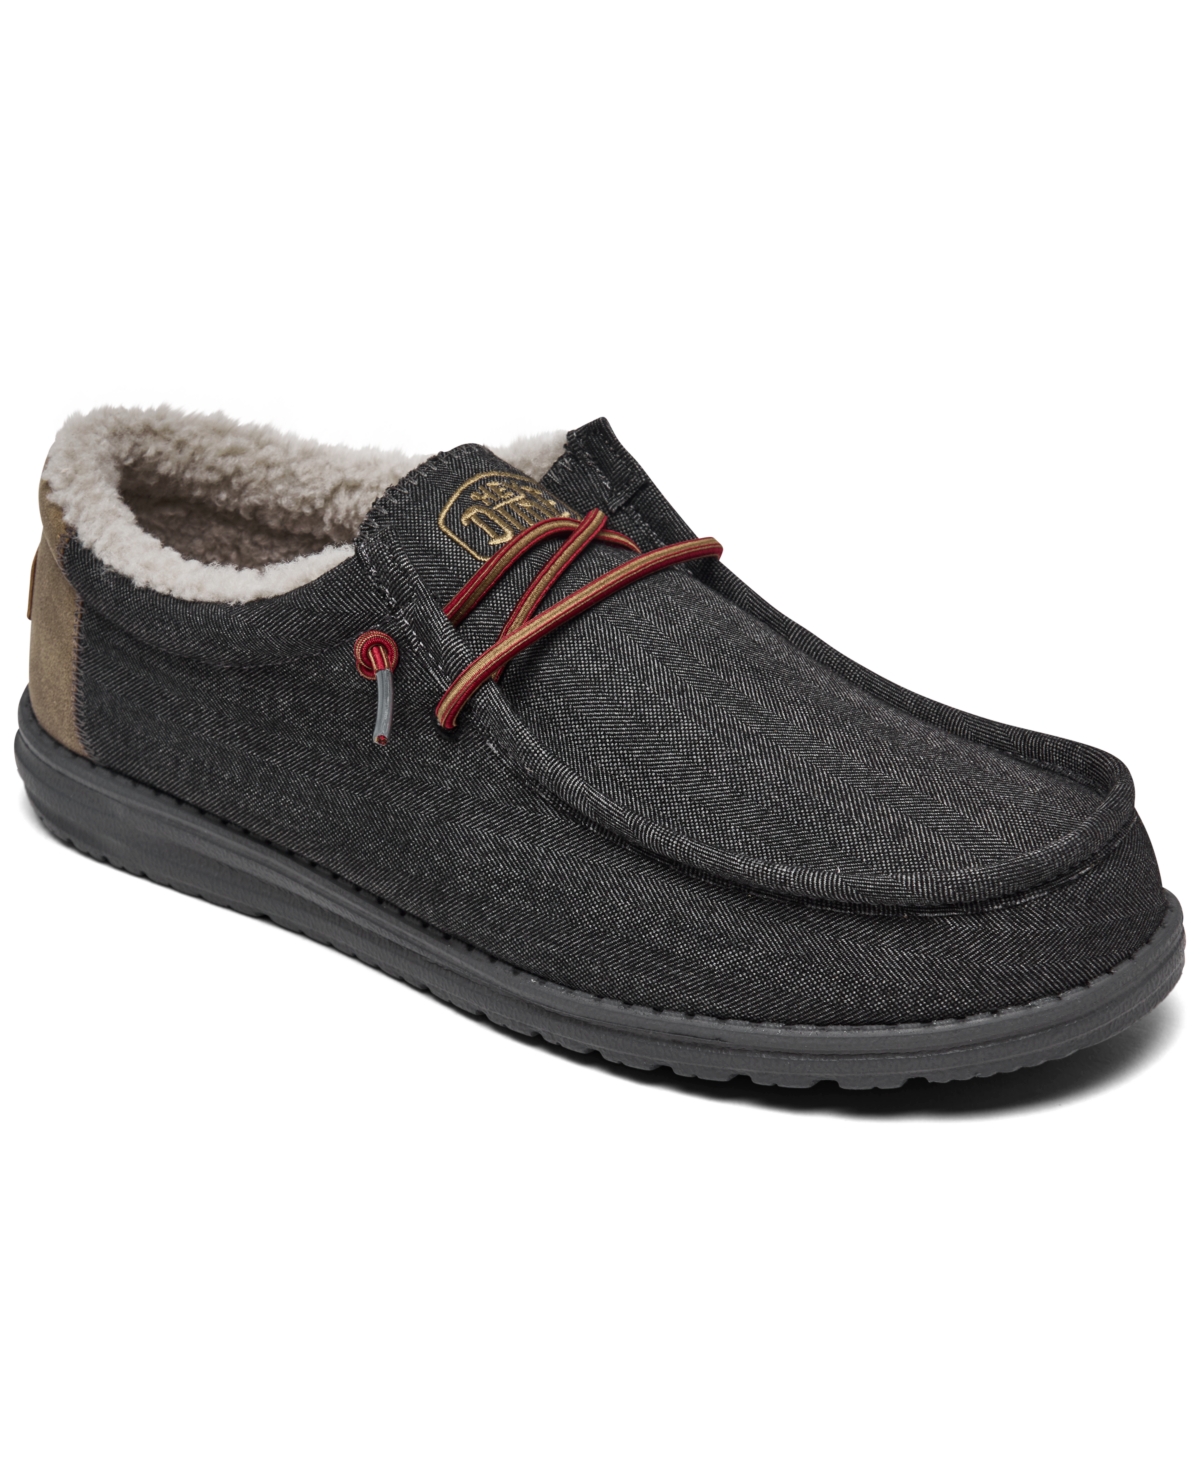 Men's Wally Black Shell Casual Slip-On Moccasin Sneakers from Finish Line - Dark Gray